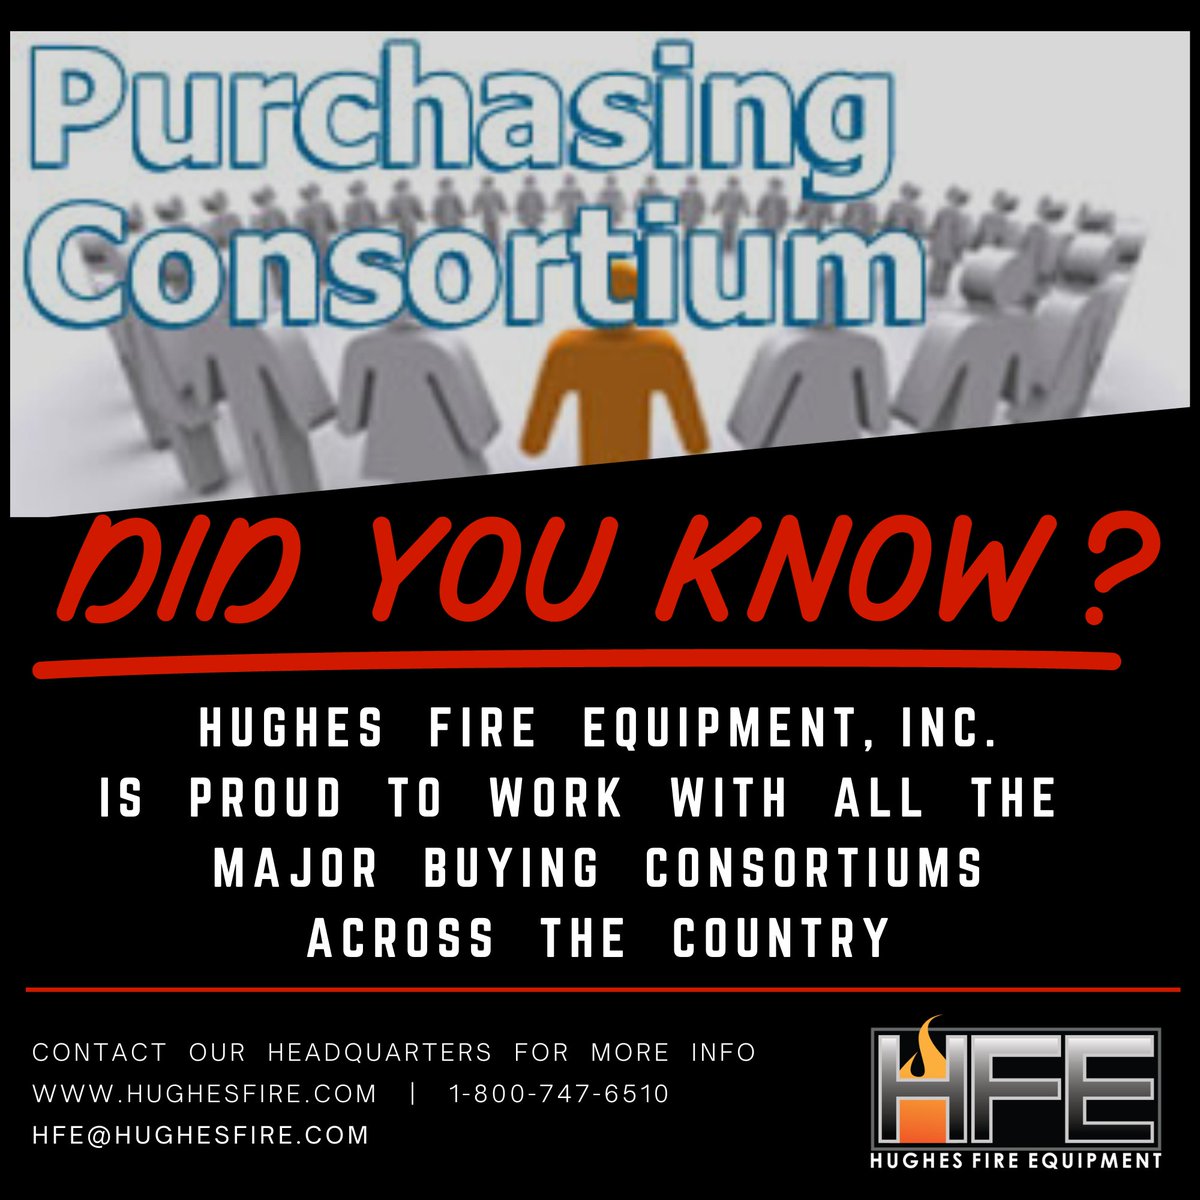 Buying Consortiums saves TIME & MONEY by easing the rigorous & sometimes political bid process through state-level and national entities!
We are proud to work with Consortiums like:
-Sourcewell
-HGACBuy
-NPPGov
-NASPO
For more info, visit our website: hughesfire.com/news